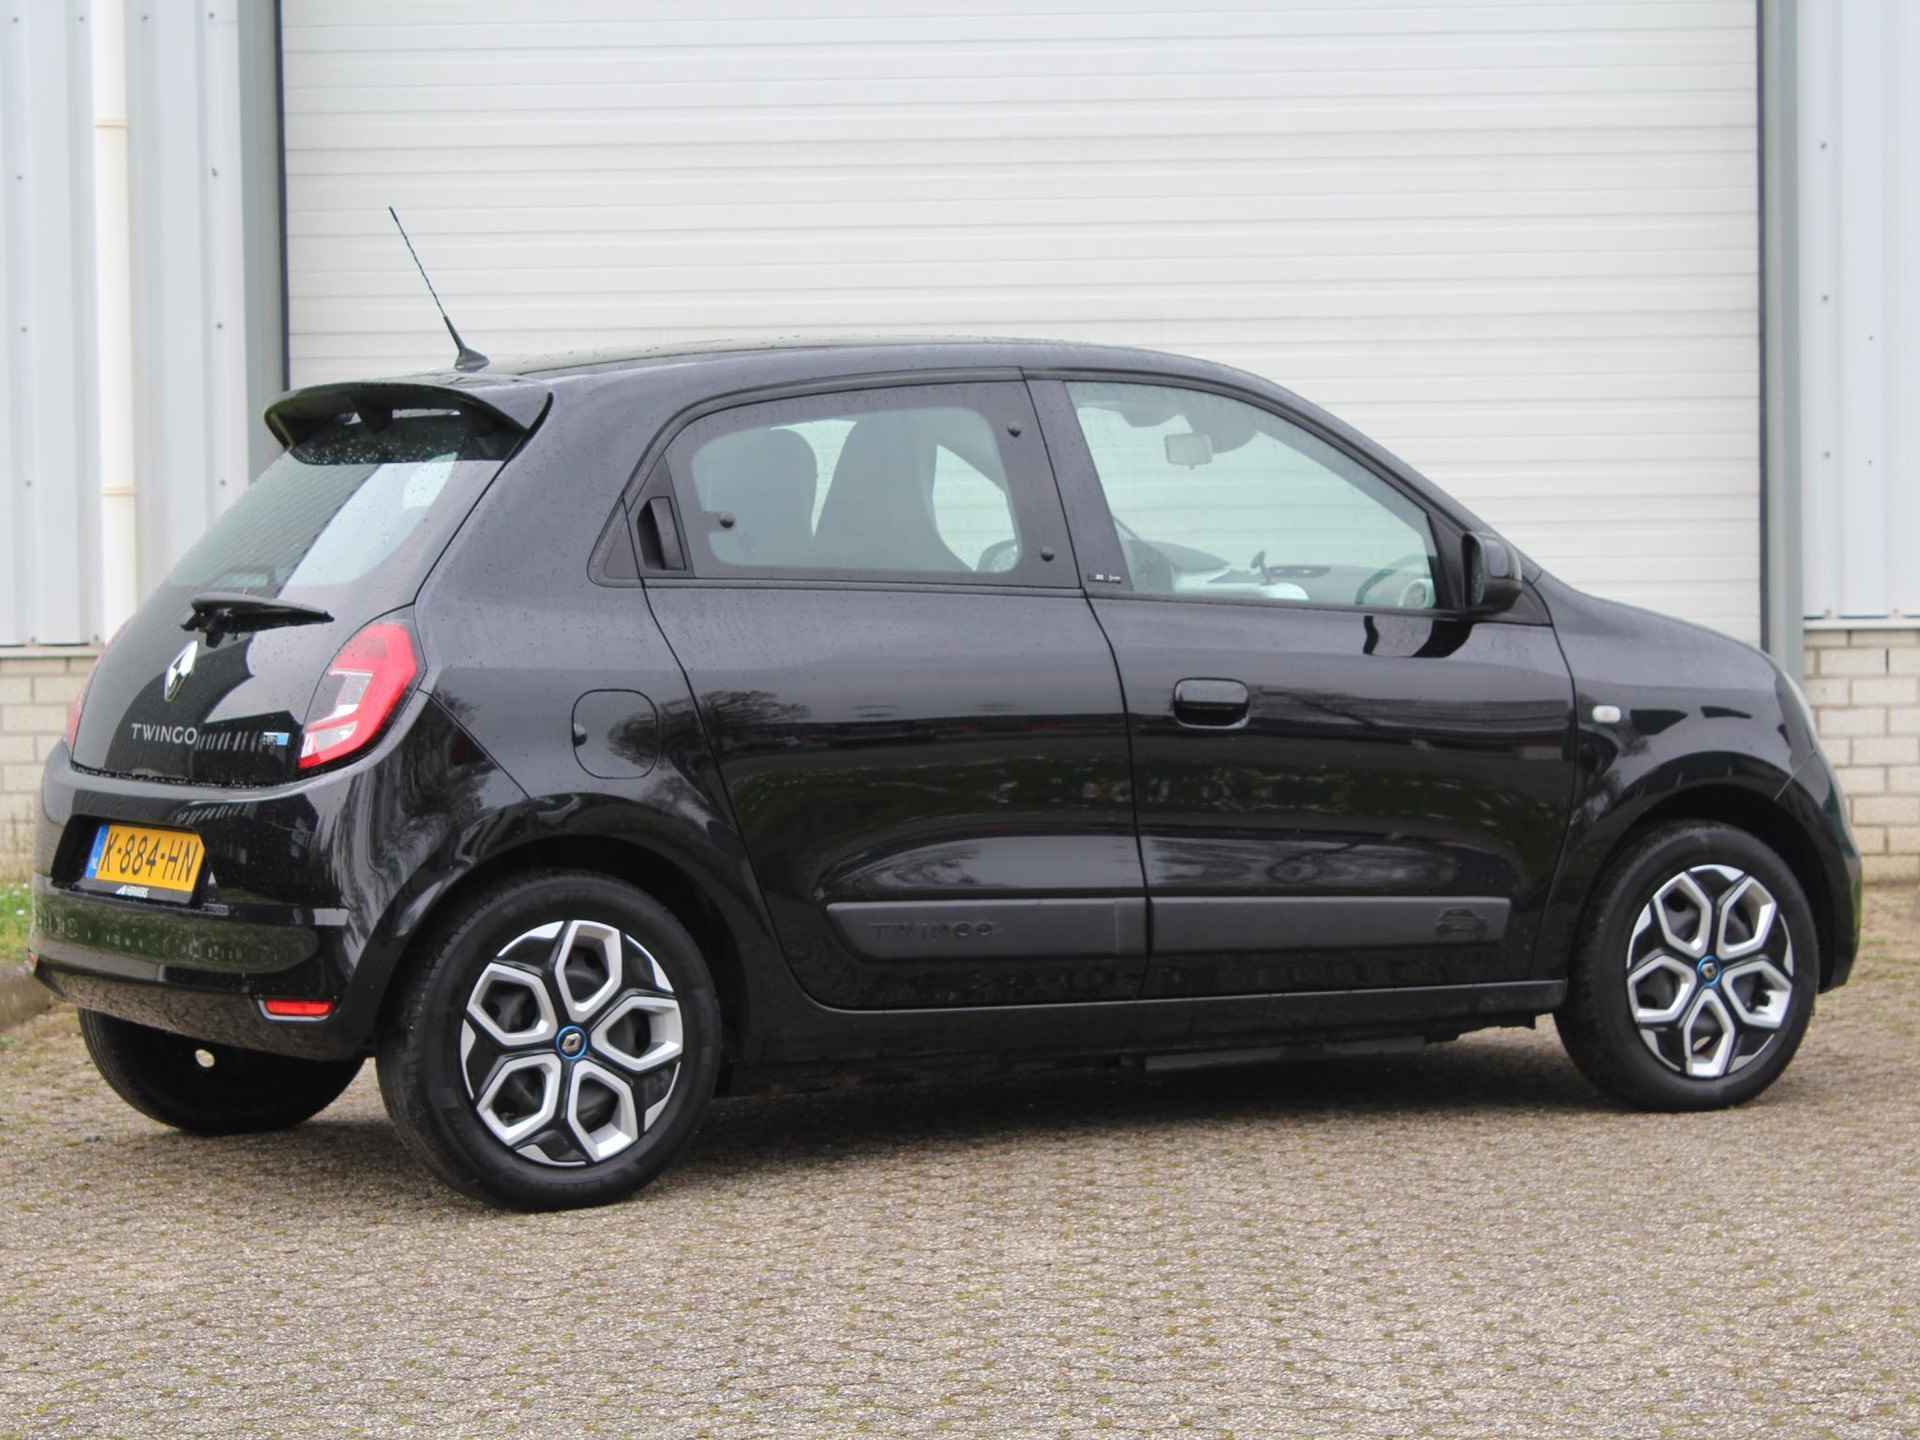 Renault Twingo Z.E. R80 Collection / SUBSIDIE  € 2000,- mogelijk / AUTOMAAT / Navigatiesysteem / Airco / Apple Car Play & Android Auto / DAB / Led dagrijverlichting / Metaalkleur / Cruise control - 3/47